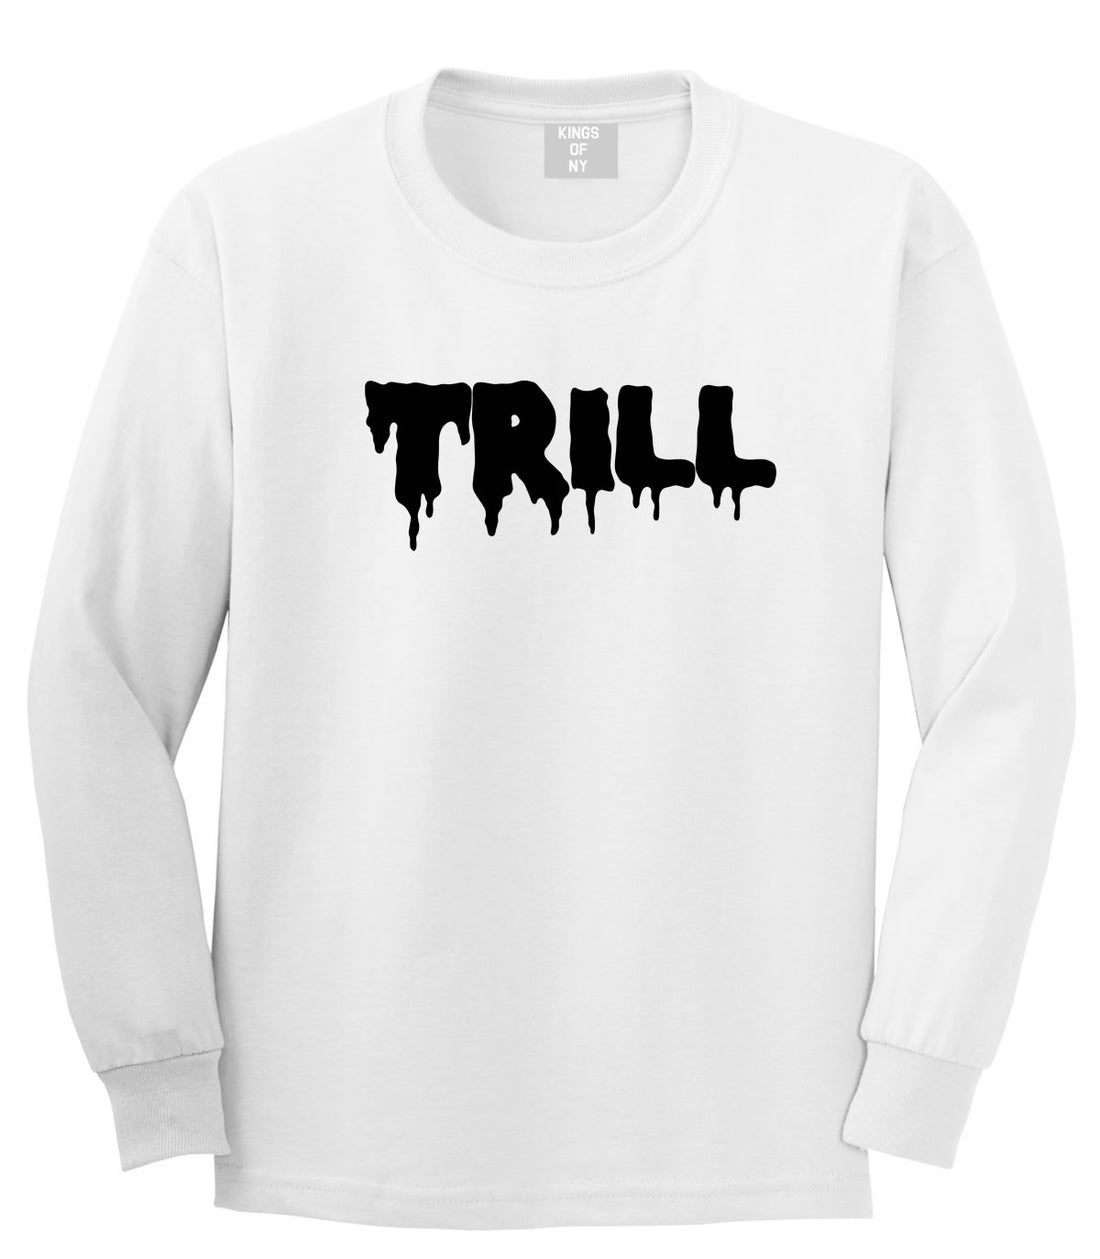 Trill Blood New York Bx Been Style Fashion Long Sleeve Boys Kids T-Shirt in White by Kings Of NY